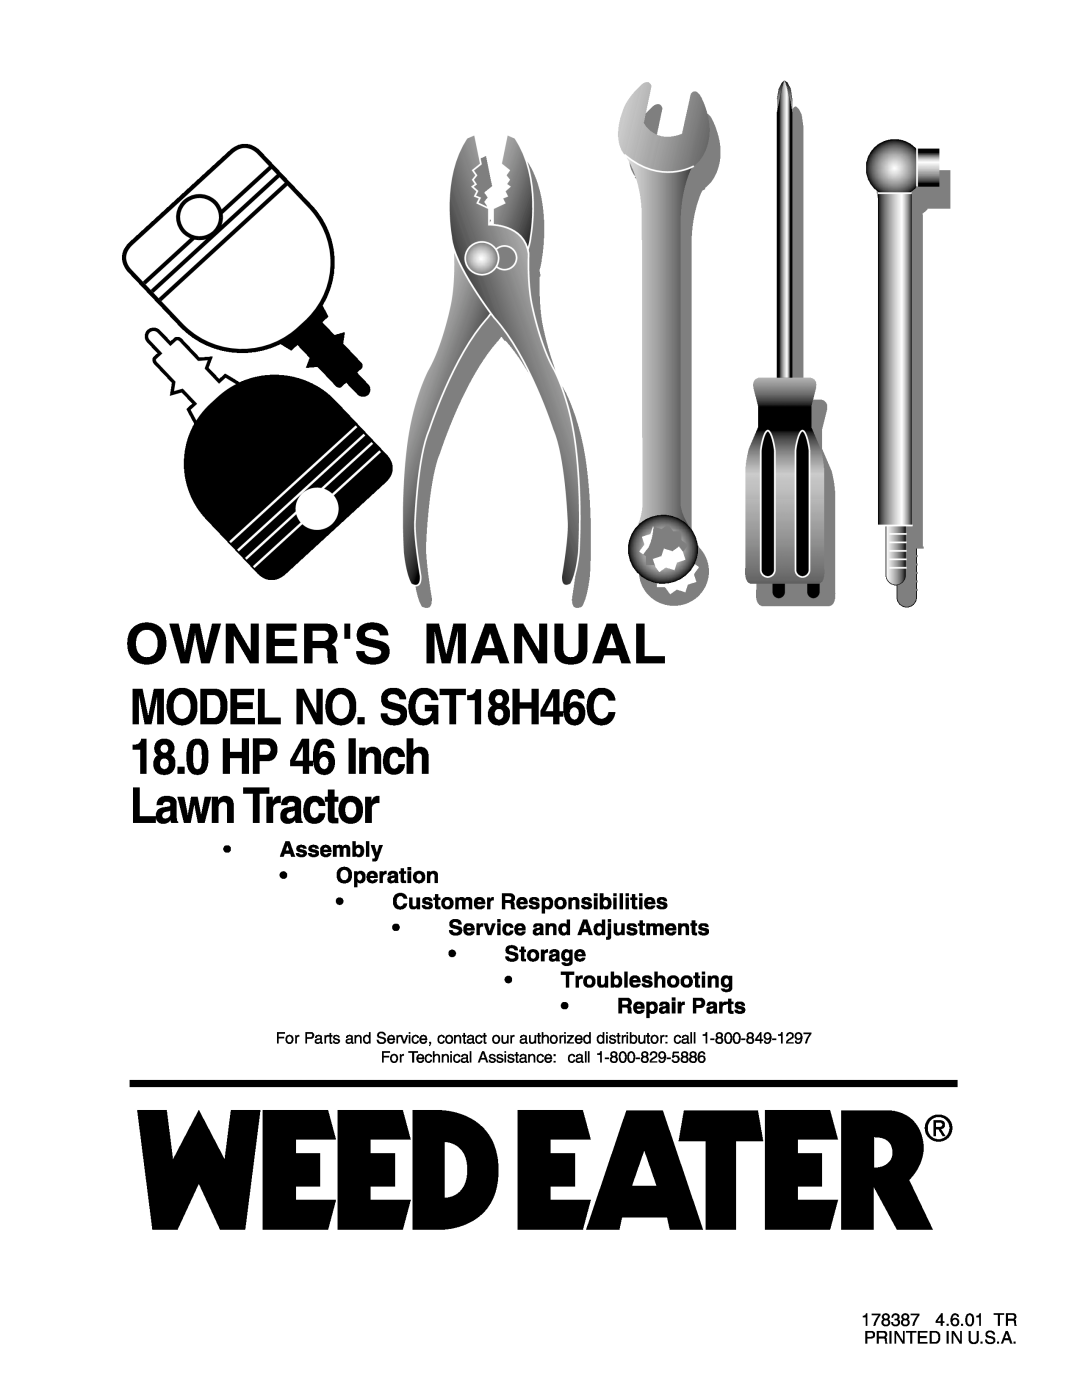 Weed Eater manual Owners Manual, MODEL NO. SGT18H46C 18.0 HP 46 Inch Lawn Tractor 